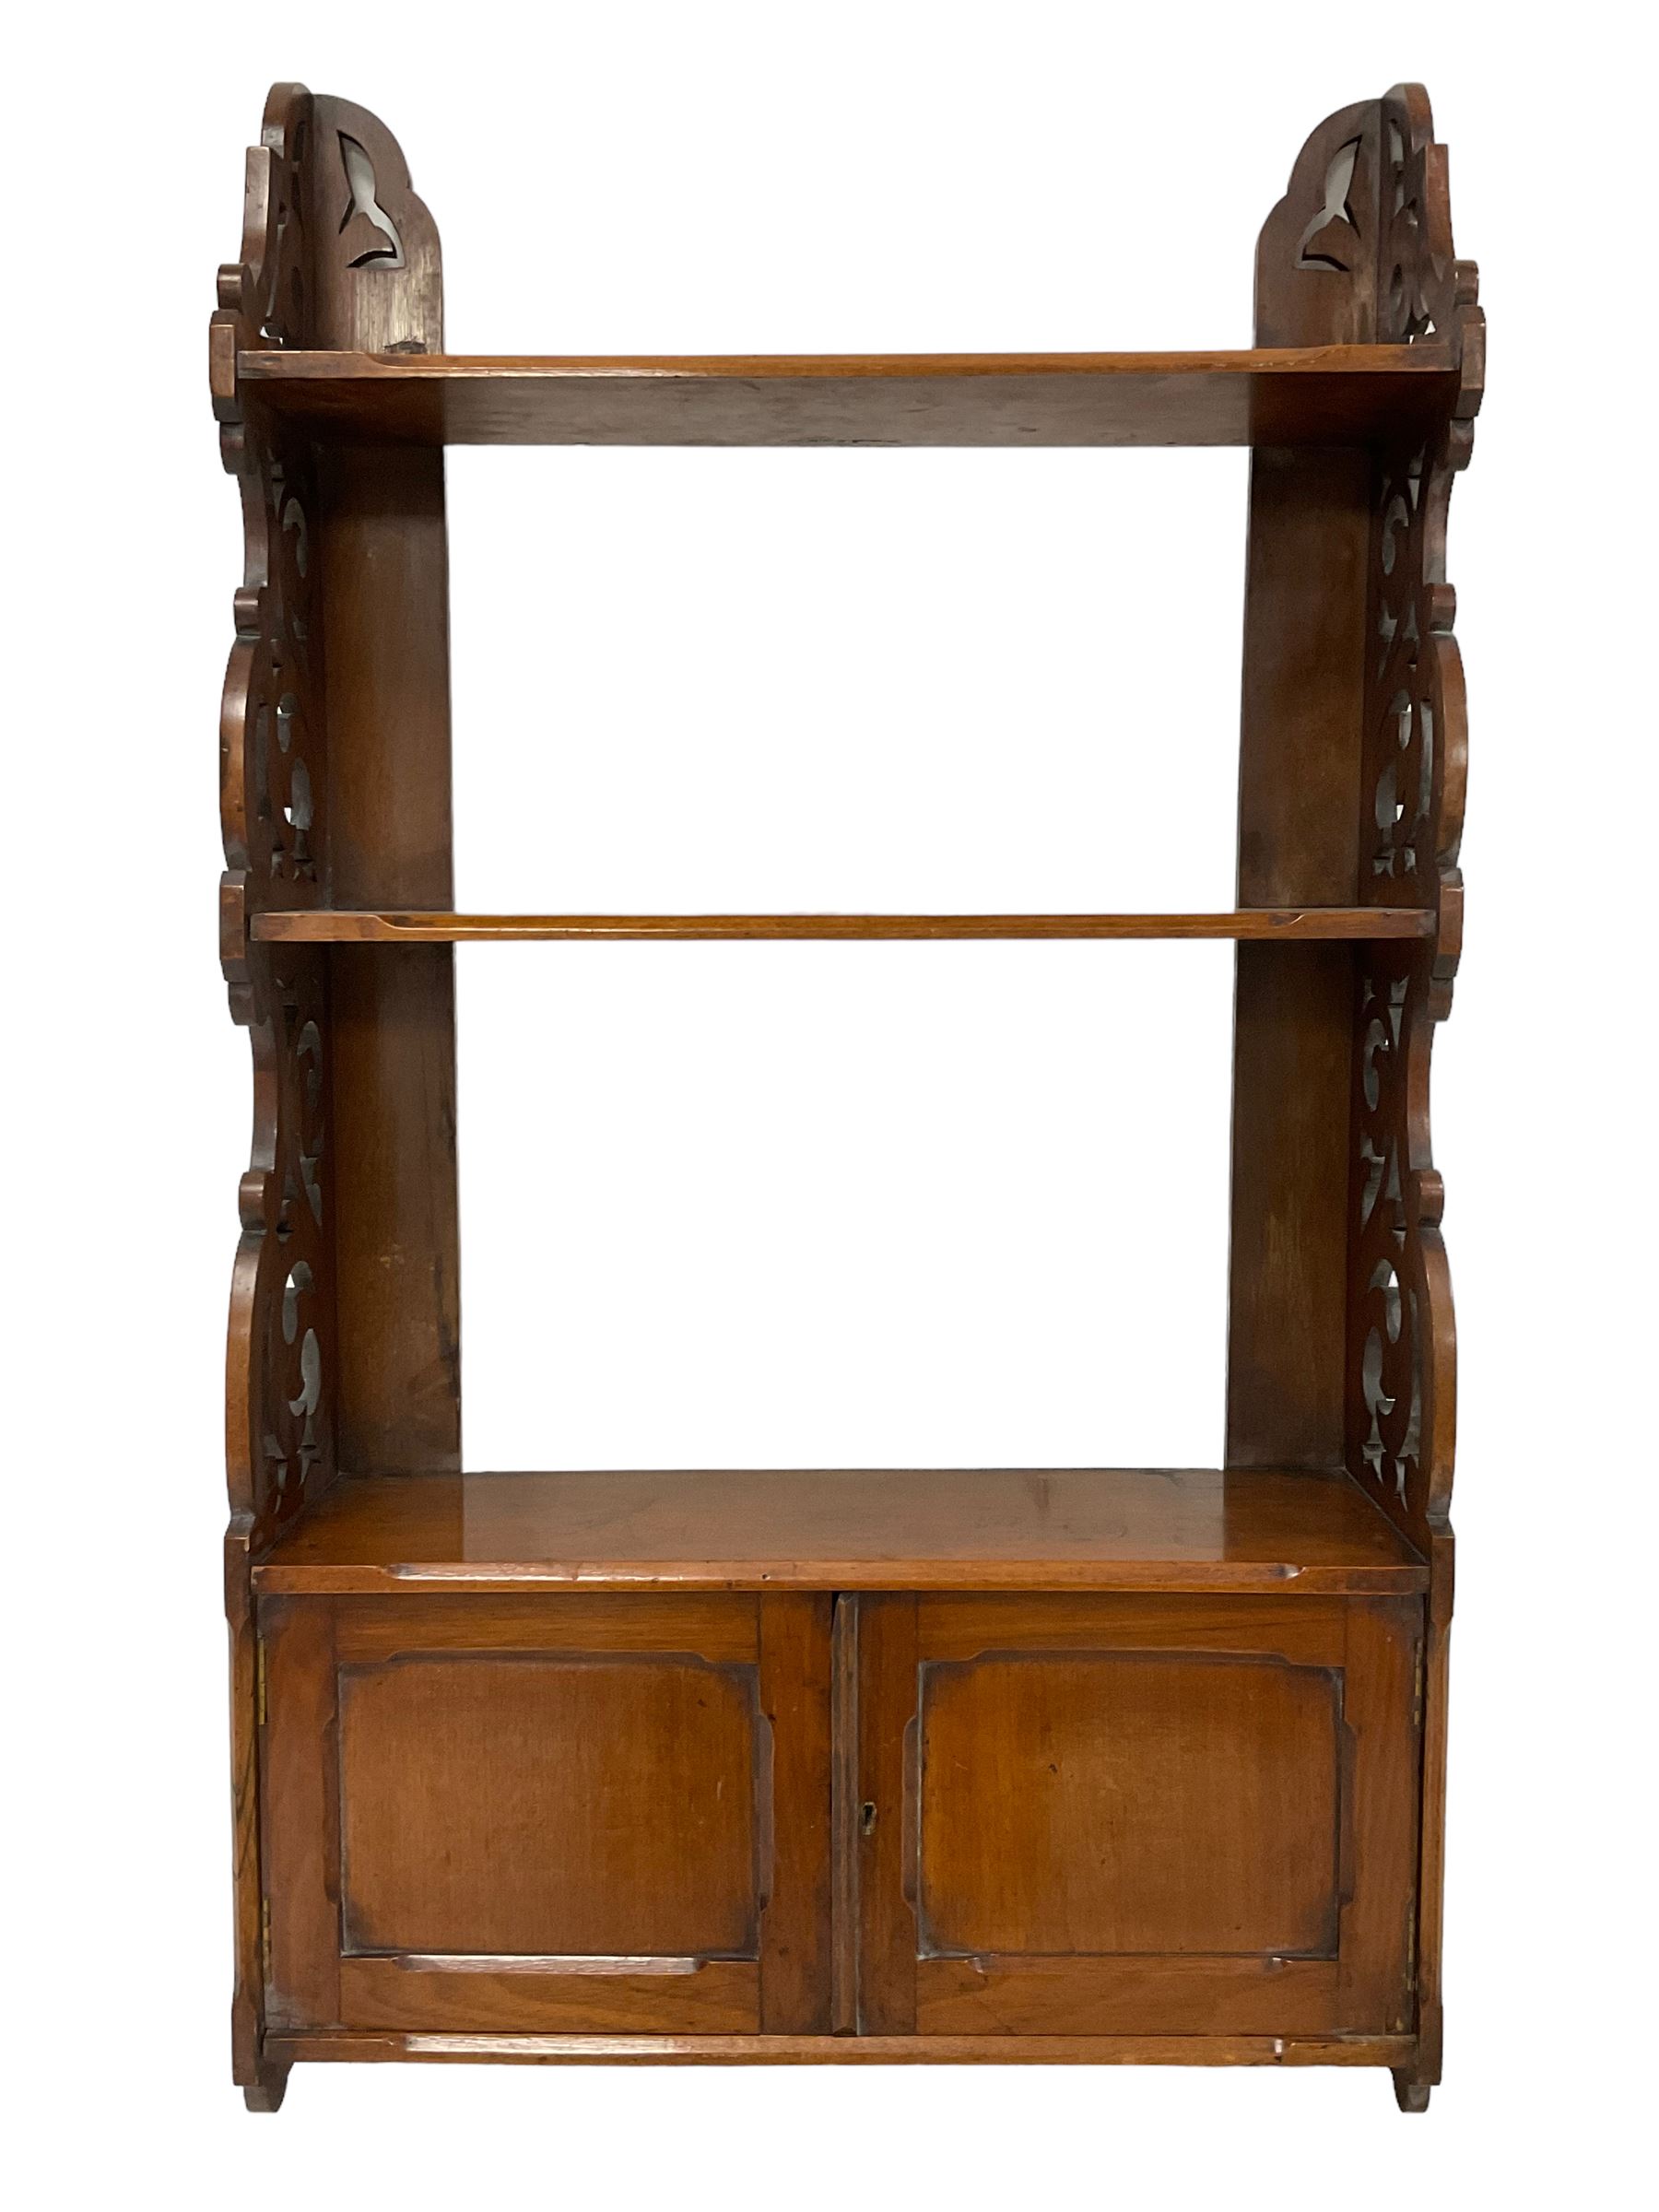 Late 19th century walnut wall hanging bookcase - Image 3 of 4